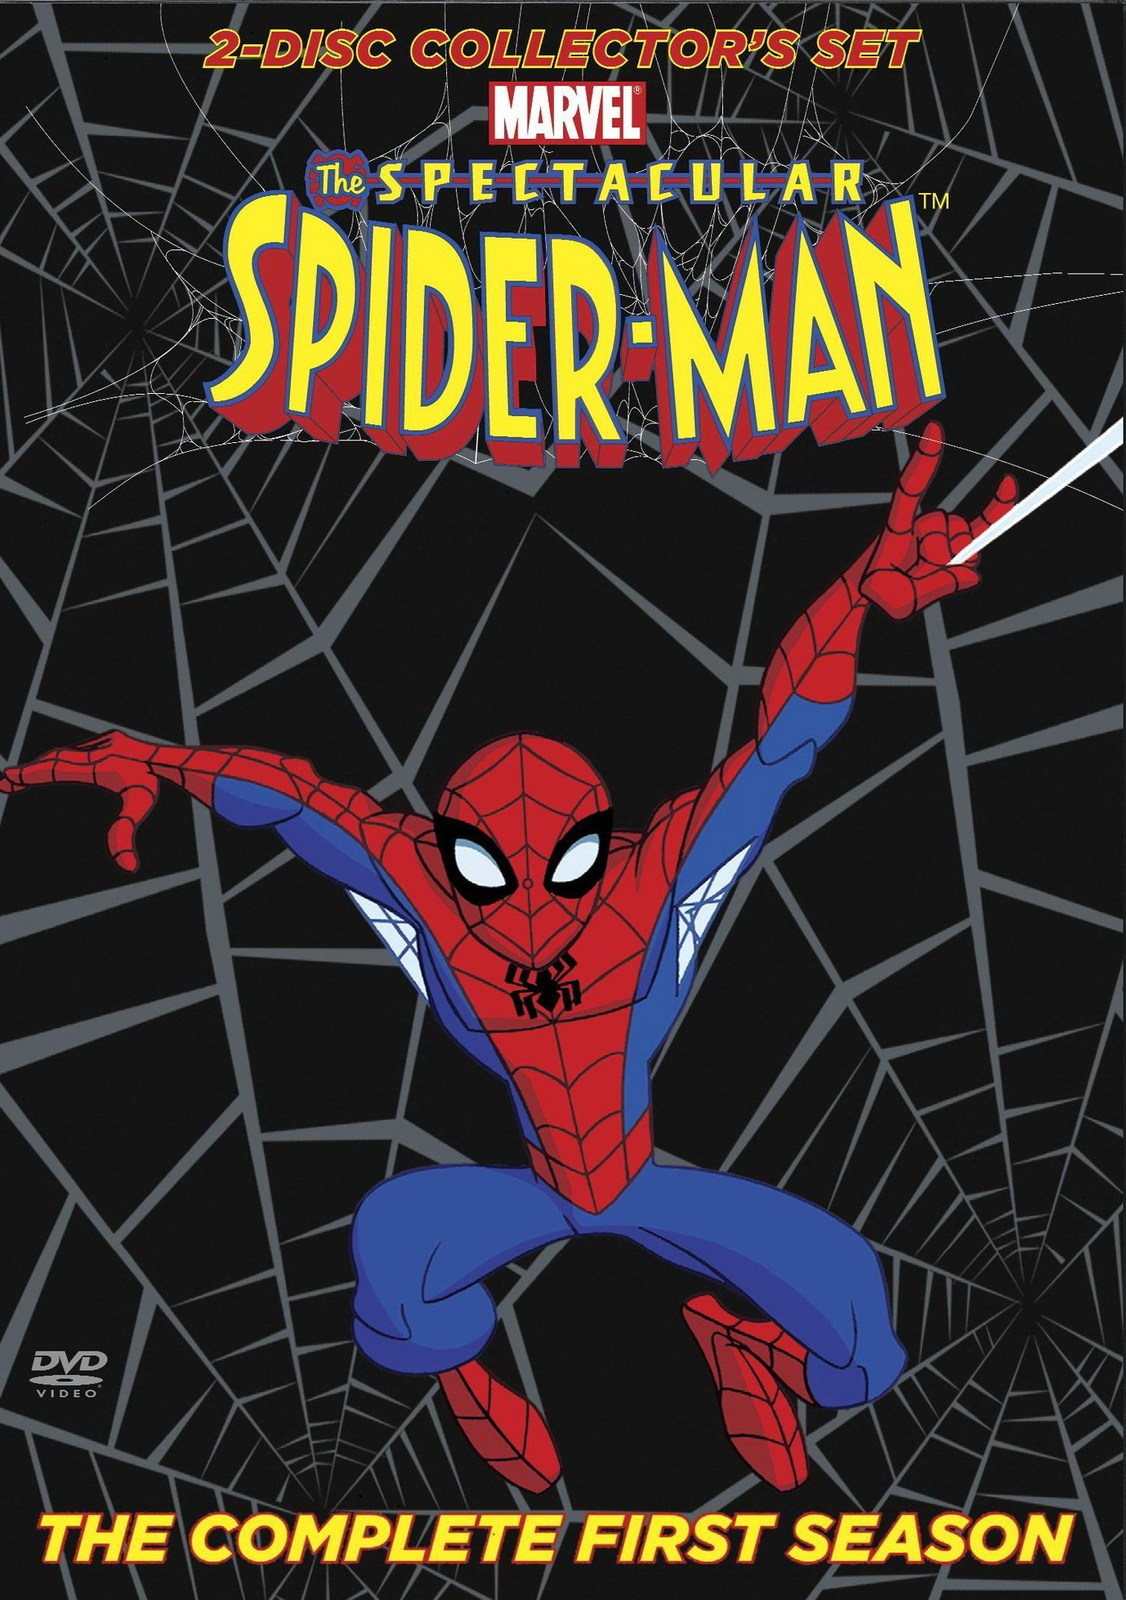 The Spectacular Spider-Man Poster 1976 Animated TV Series Art Print 24x36 27x40" - $10.90 - $24.90